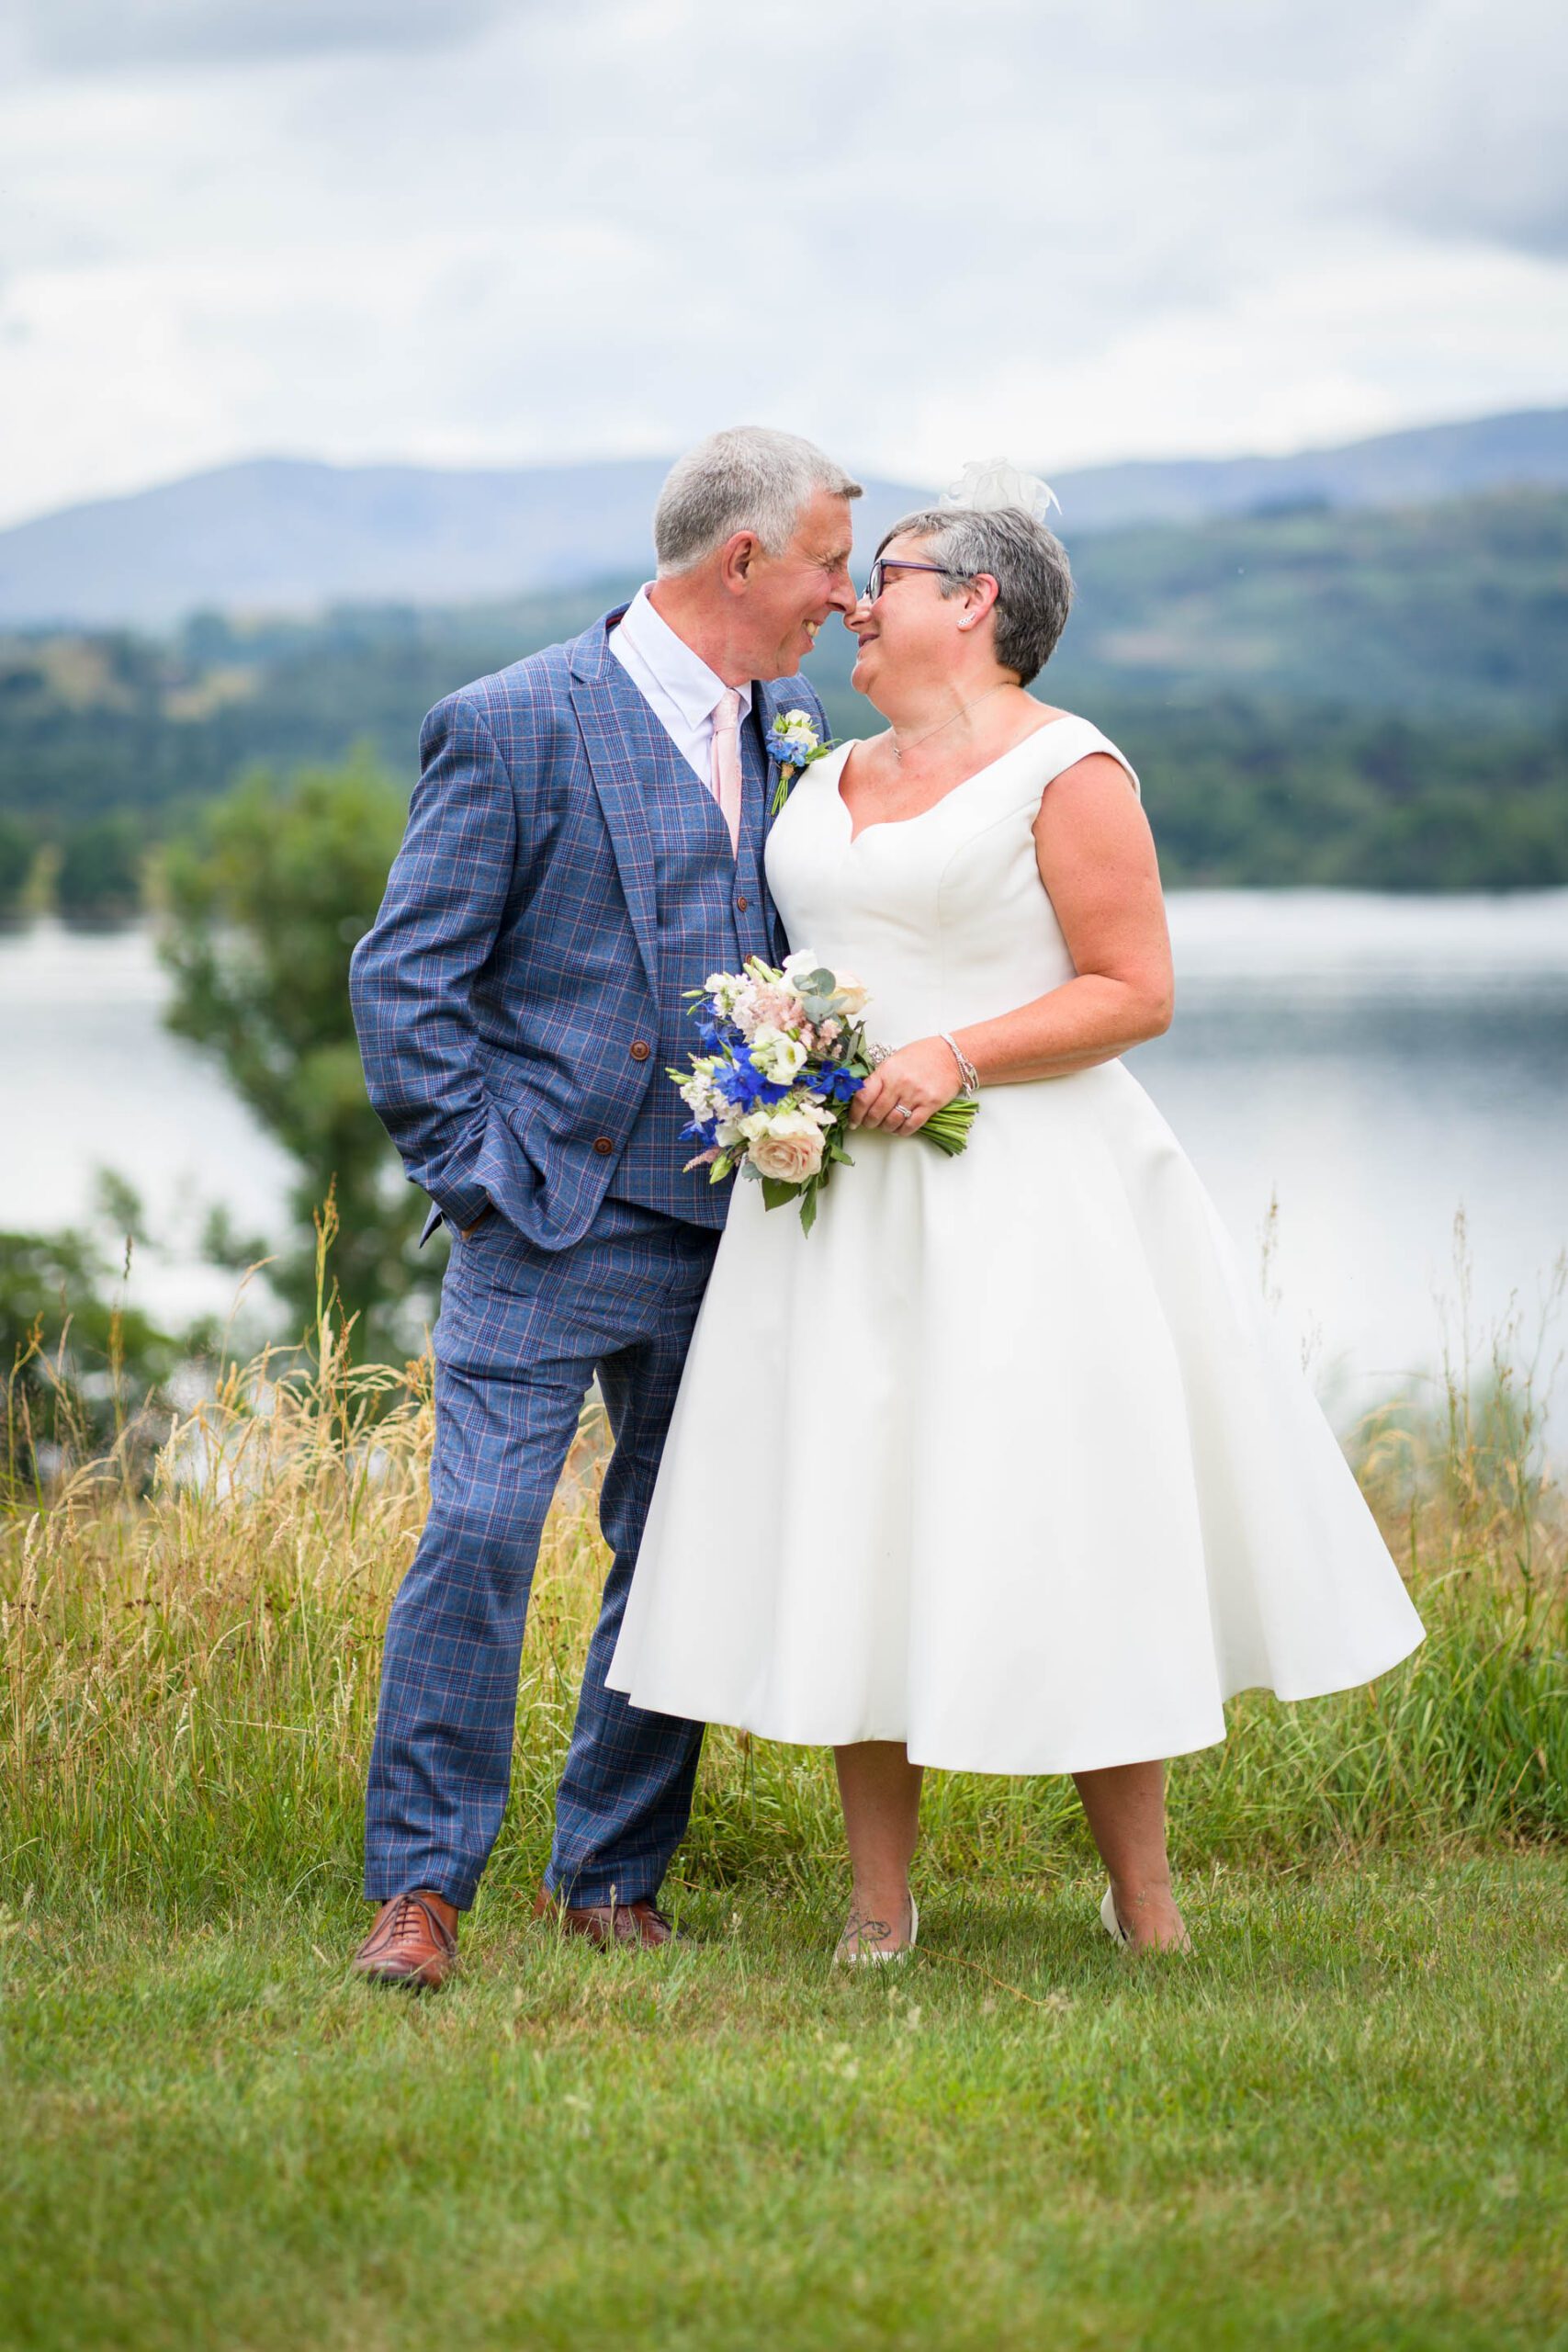 Wedding portrait of bride and groom on hill above Windermere with lake and mountains in background. Taken at their Low Wood Bay Resort wedding.